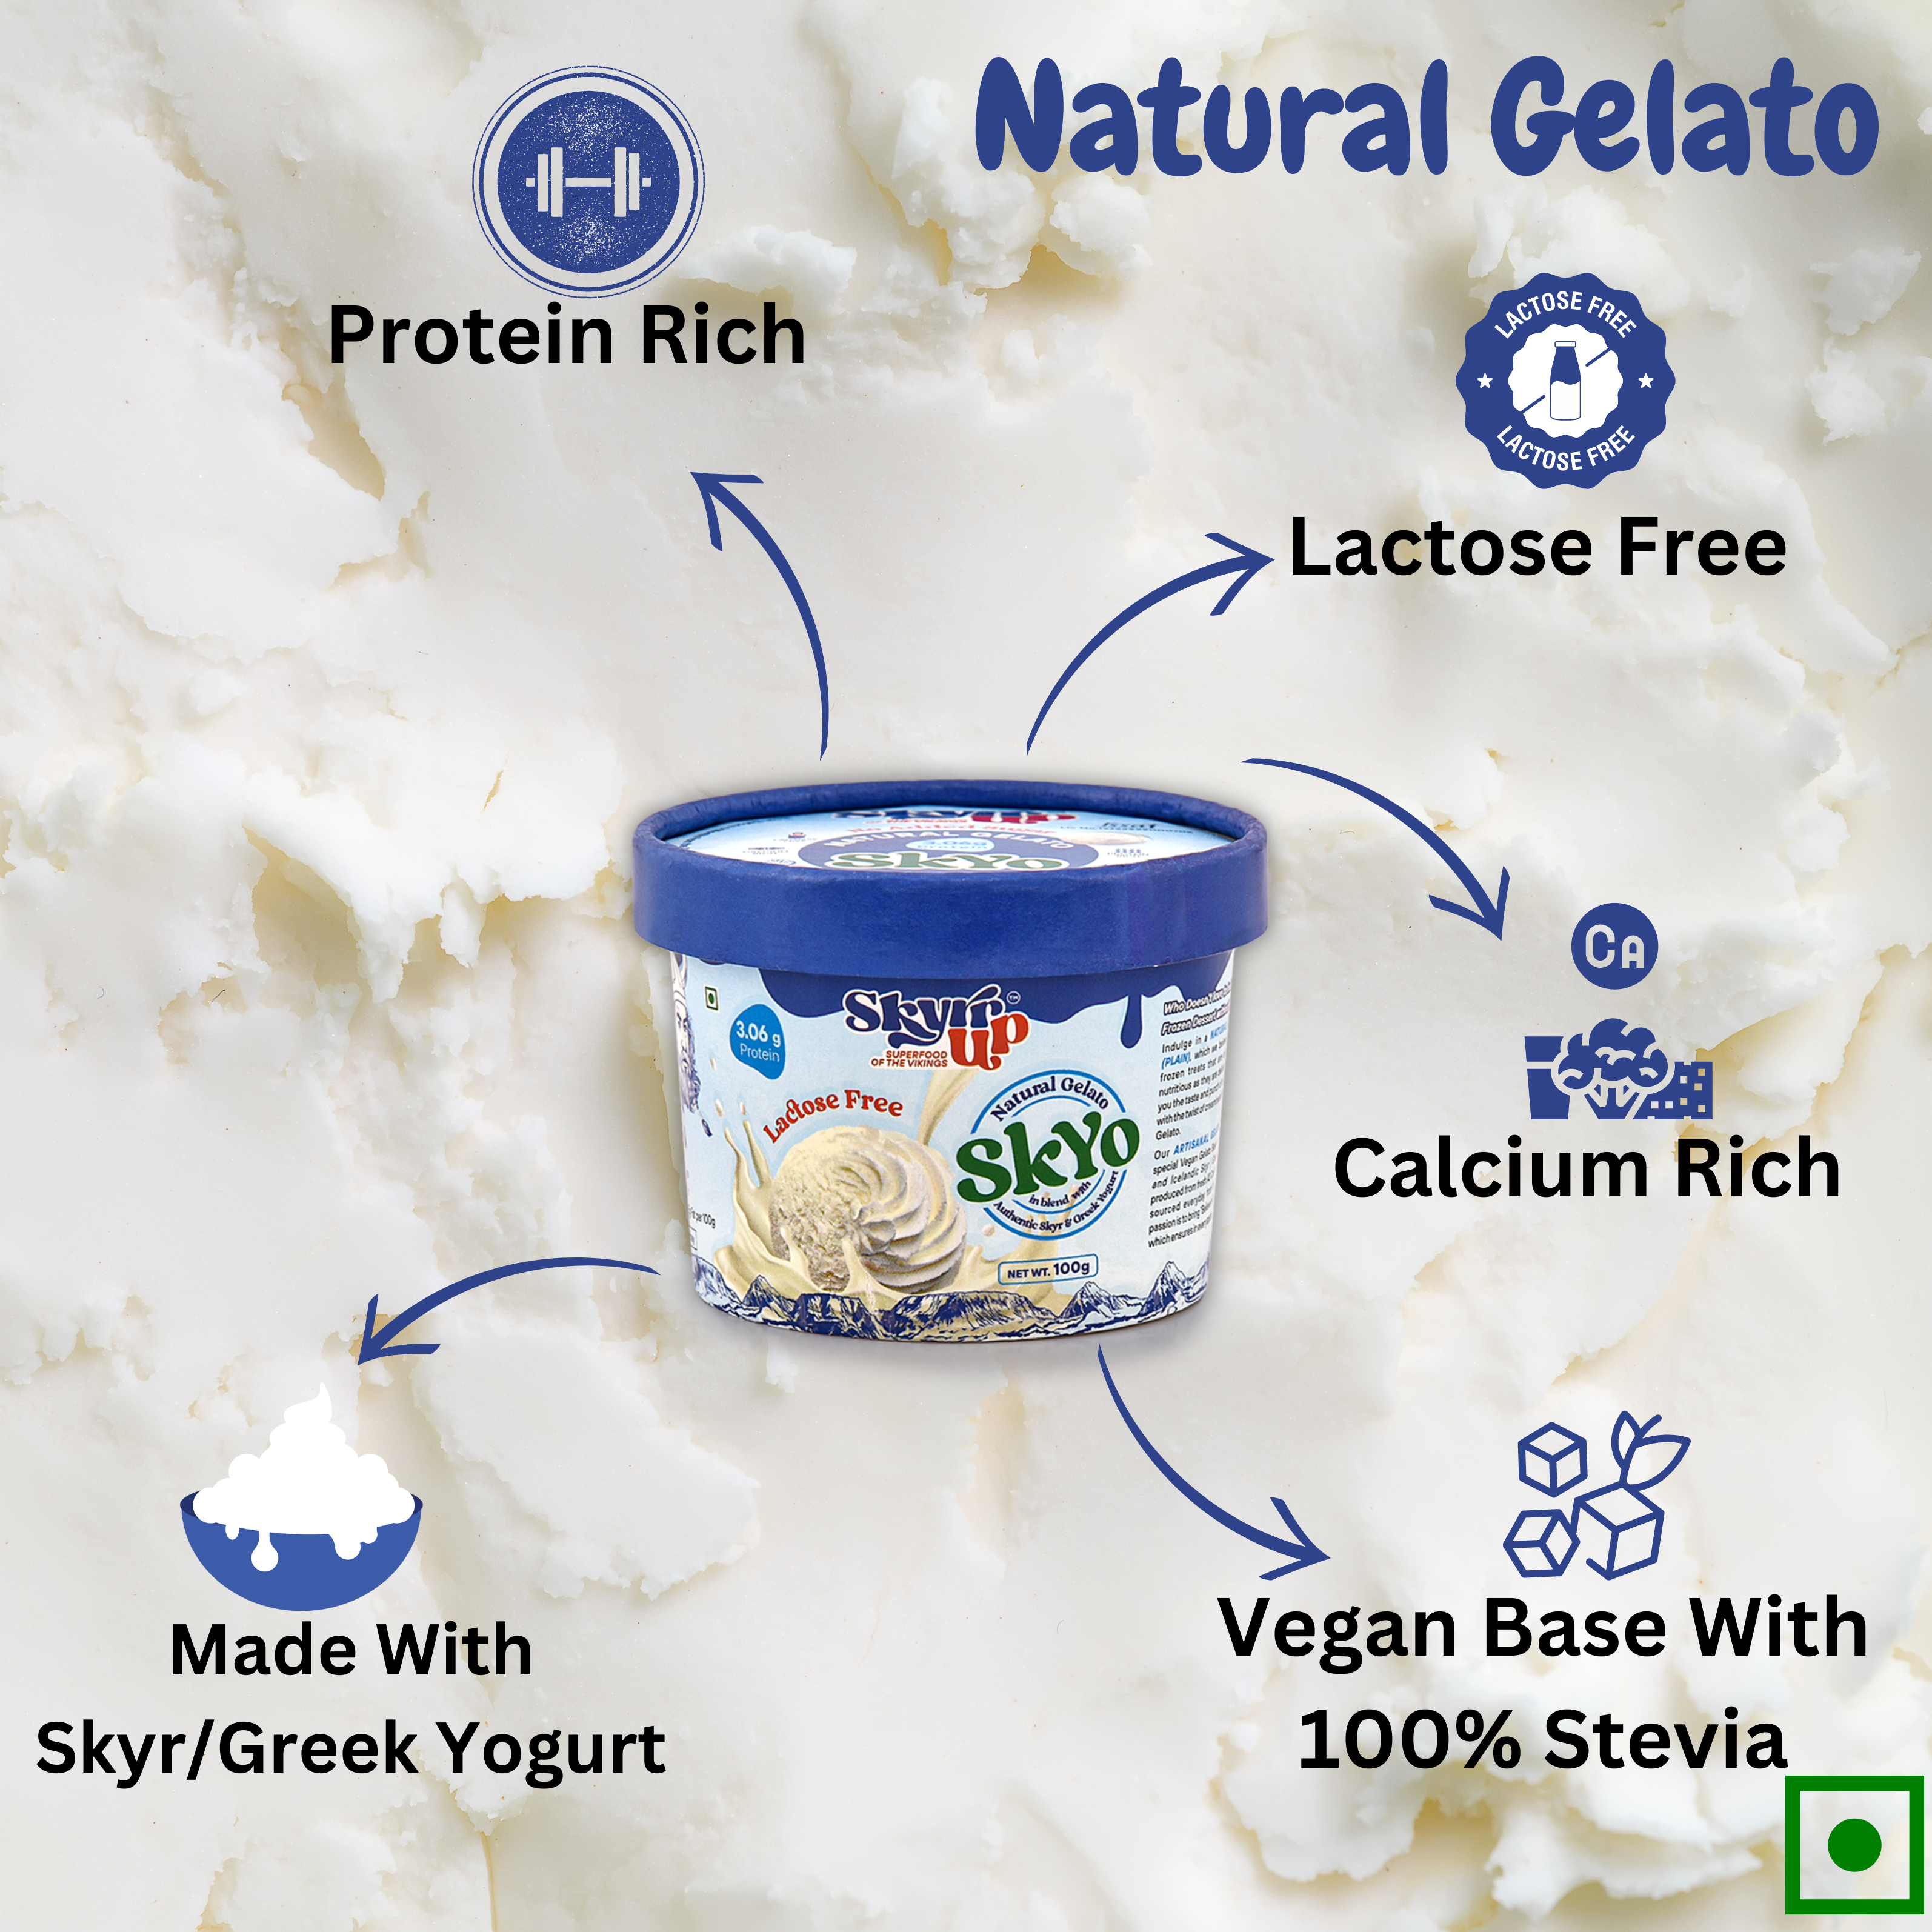 Natural Gelato( (Made From A2 Milk) - Gelato 100g Nutritional Value, No added Sugar, Lactose Free, Calcium Rich, Made With Skyr/Greek Yogurt, Protein Rich, Vegan Base With 100% Stevia